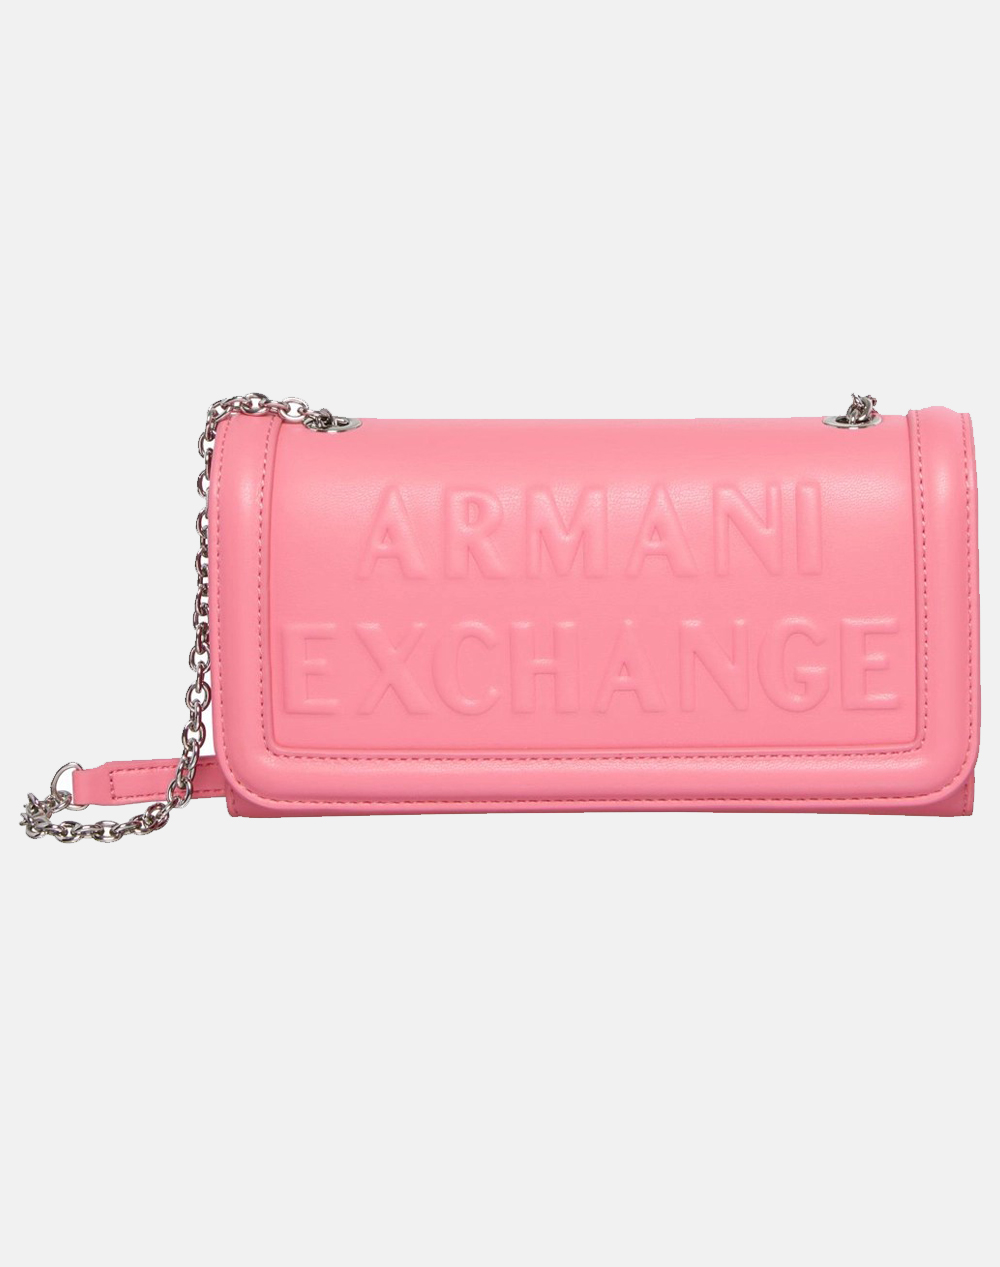 ARMANI EXCHANGE WOMAN”S WALLET ON CH (Διαστάσεις: 19 x 10 x 3.5 εκ) 9485654R729-09677 Pink